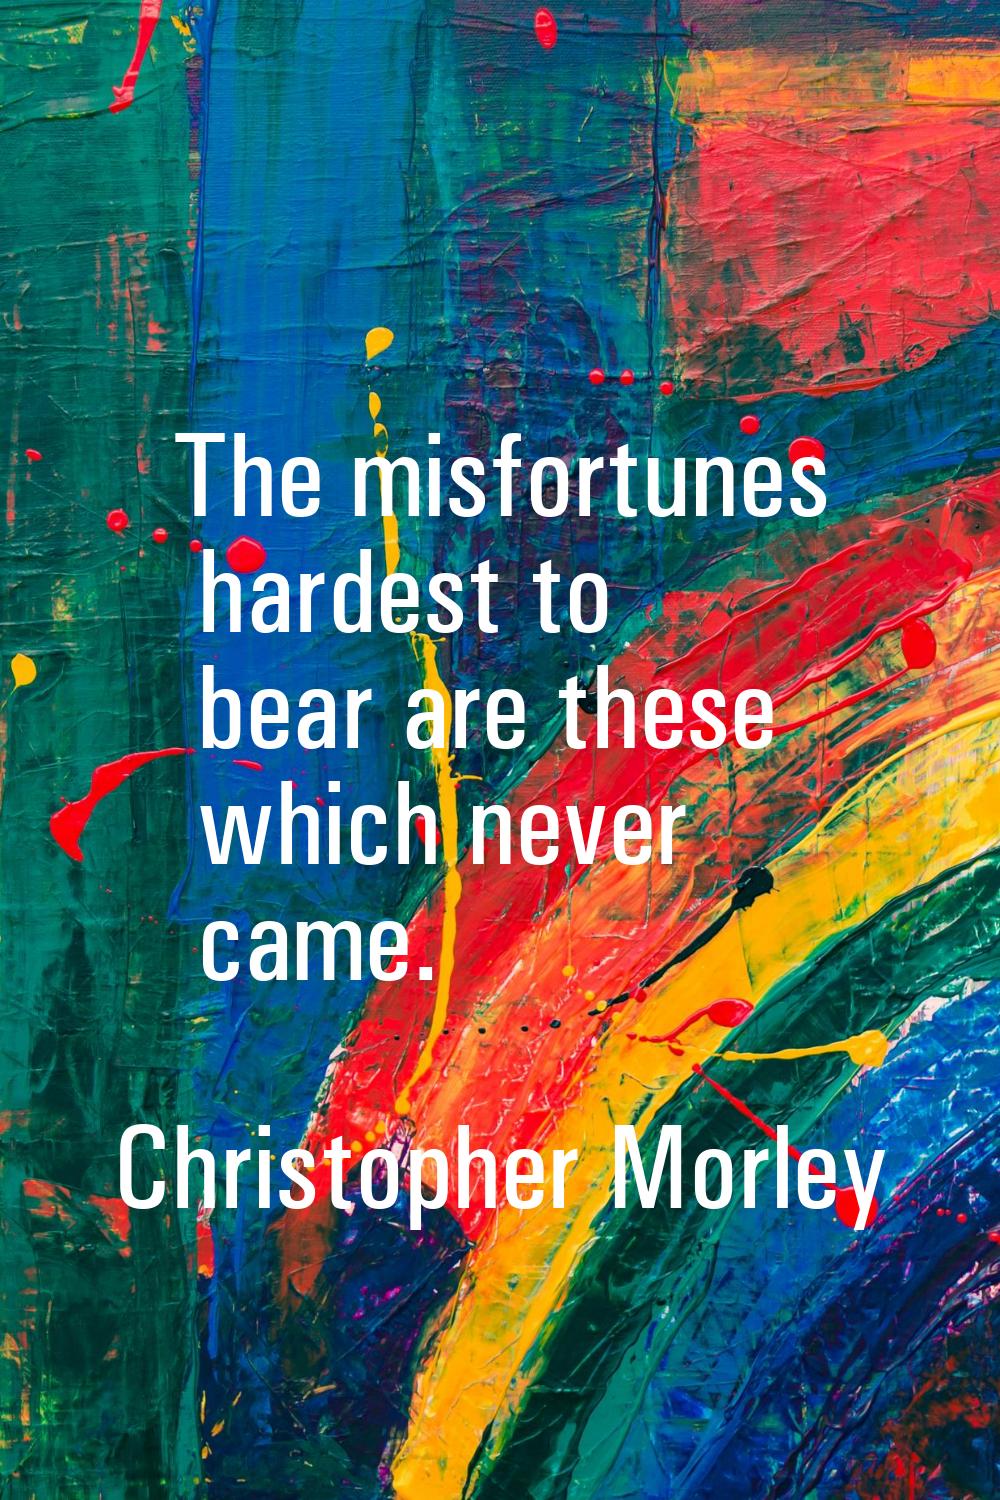 The misfortunes hardest to bear are these which never came.